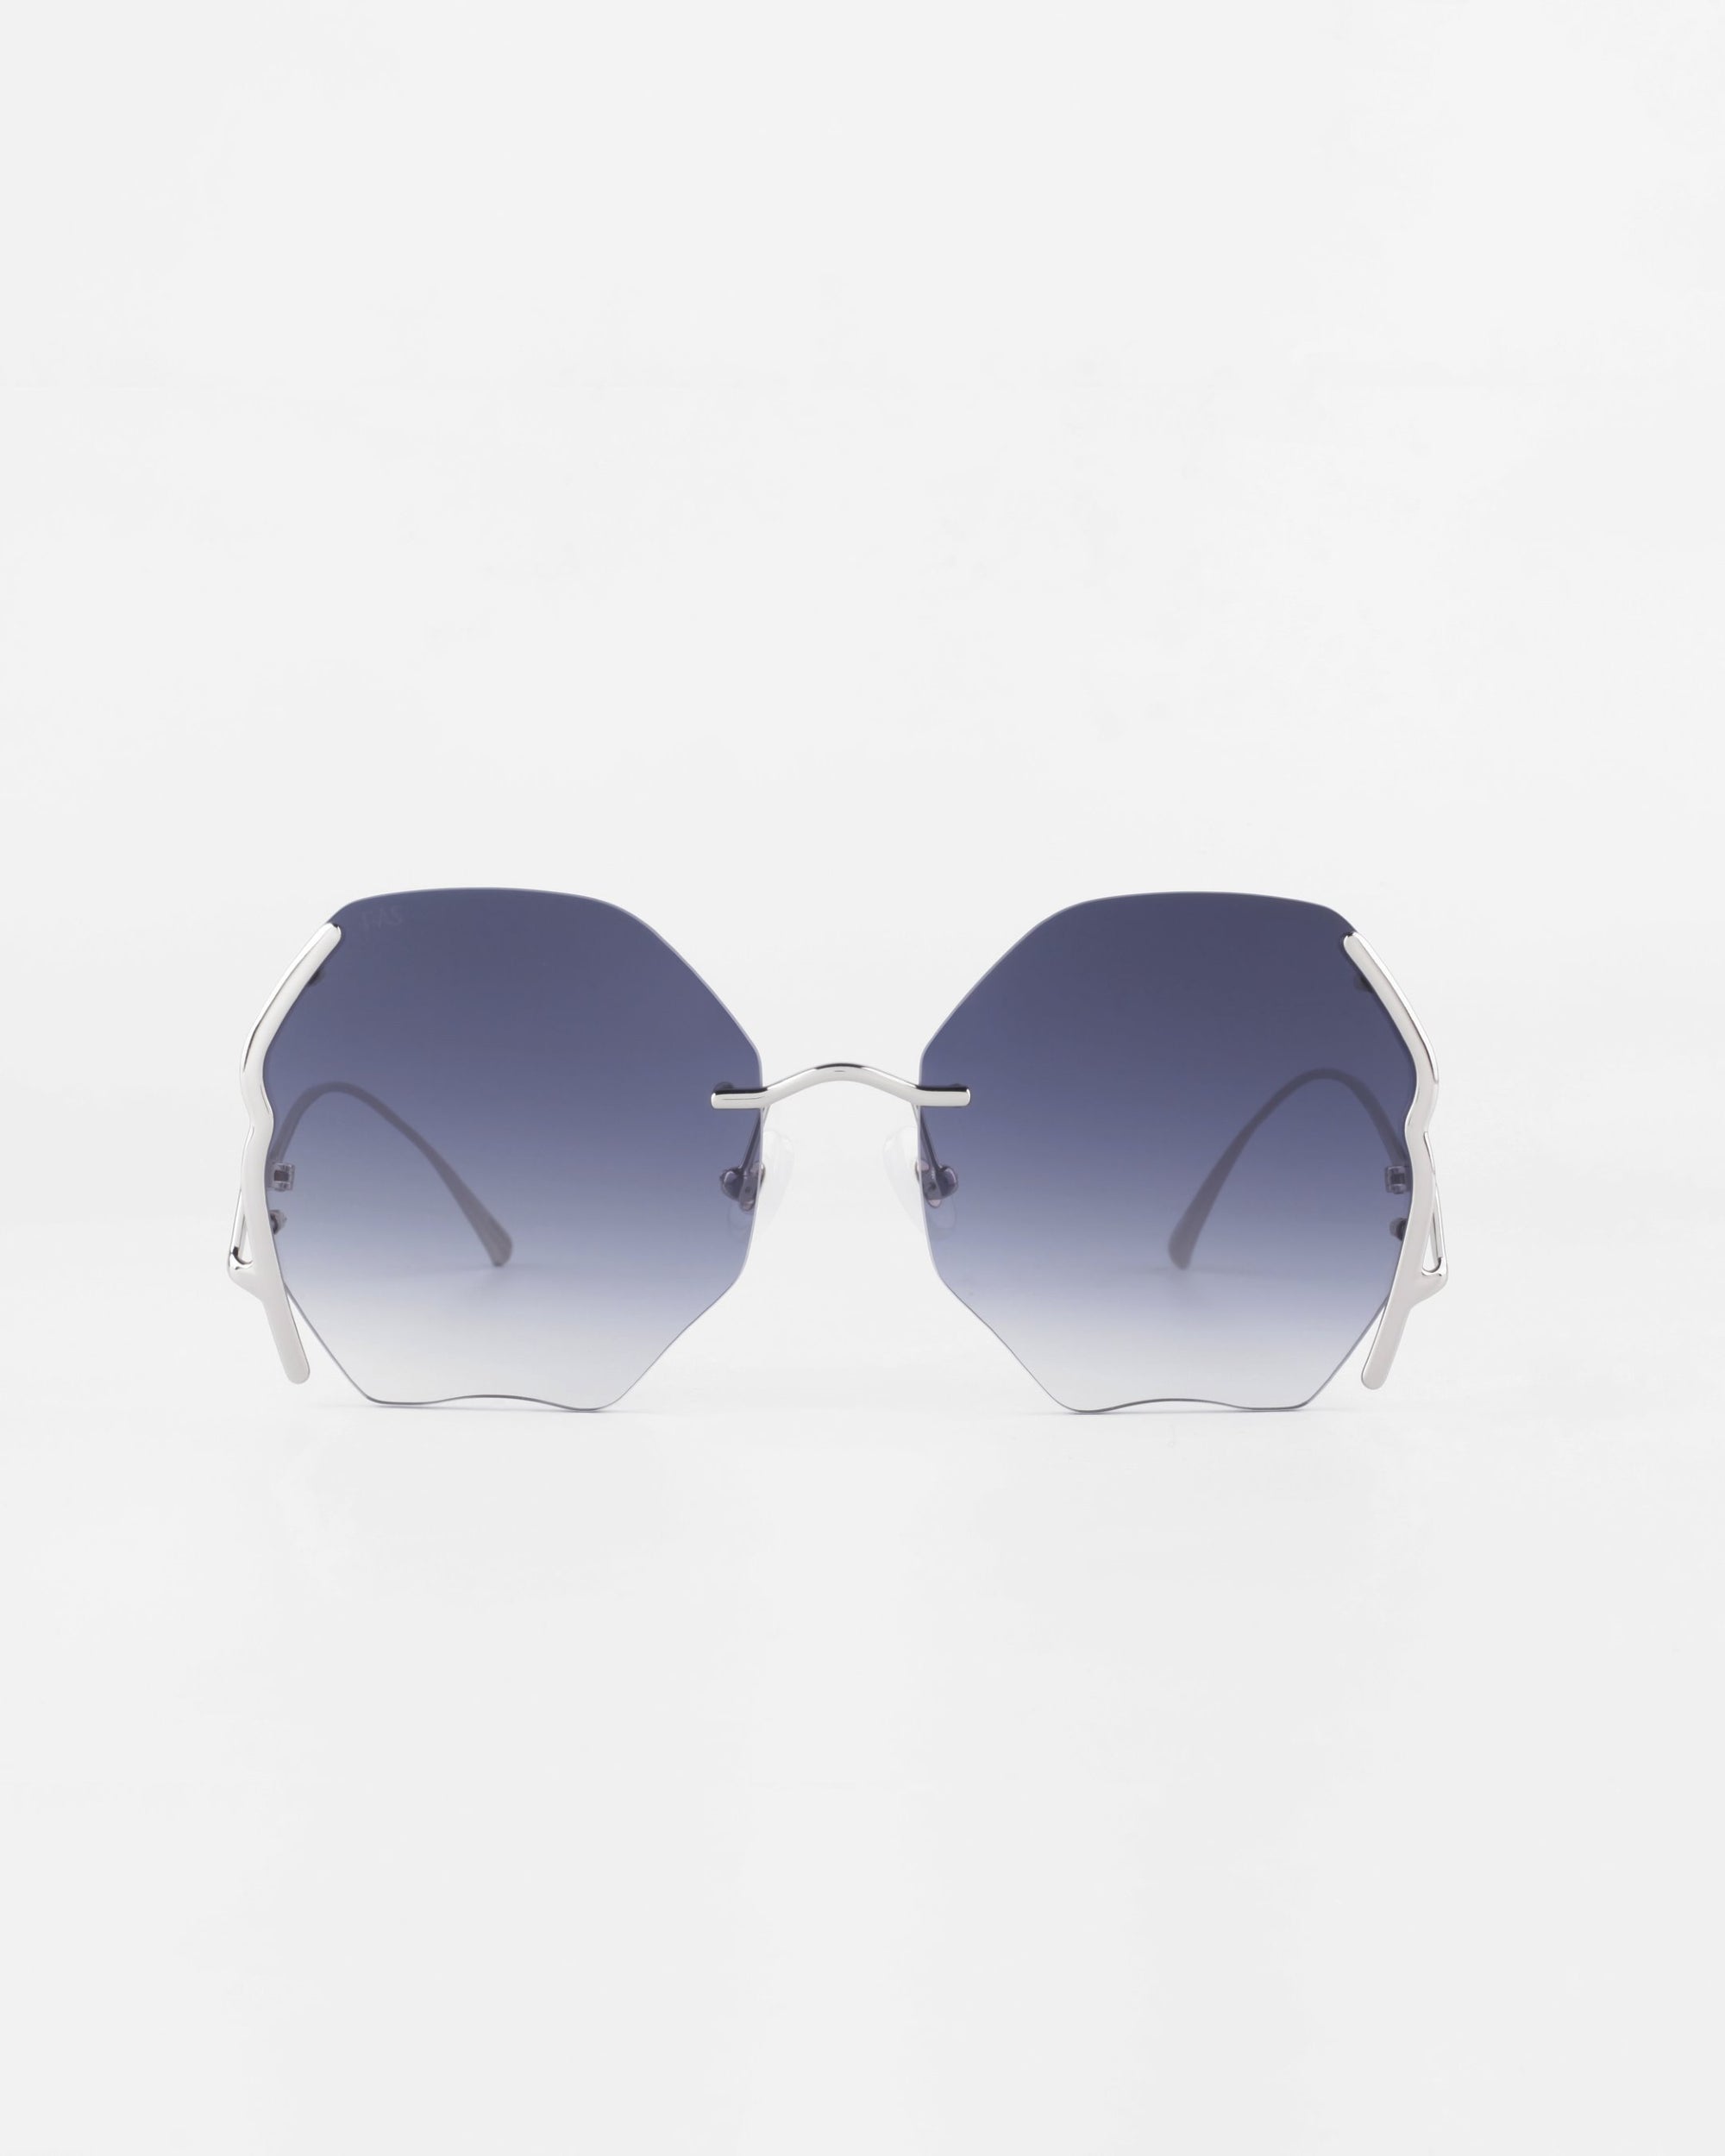 A pair of Century sunglasses from For Art's Sake® with gold-plated stainless steel thin frames. The ultra-lightweight nylon lenses offer 100% UVA & UVB protection and have a gradient from dark blue at the top to clear at the bottom. The Century sunglasses are displayed against a plain white background.